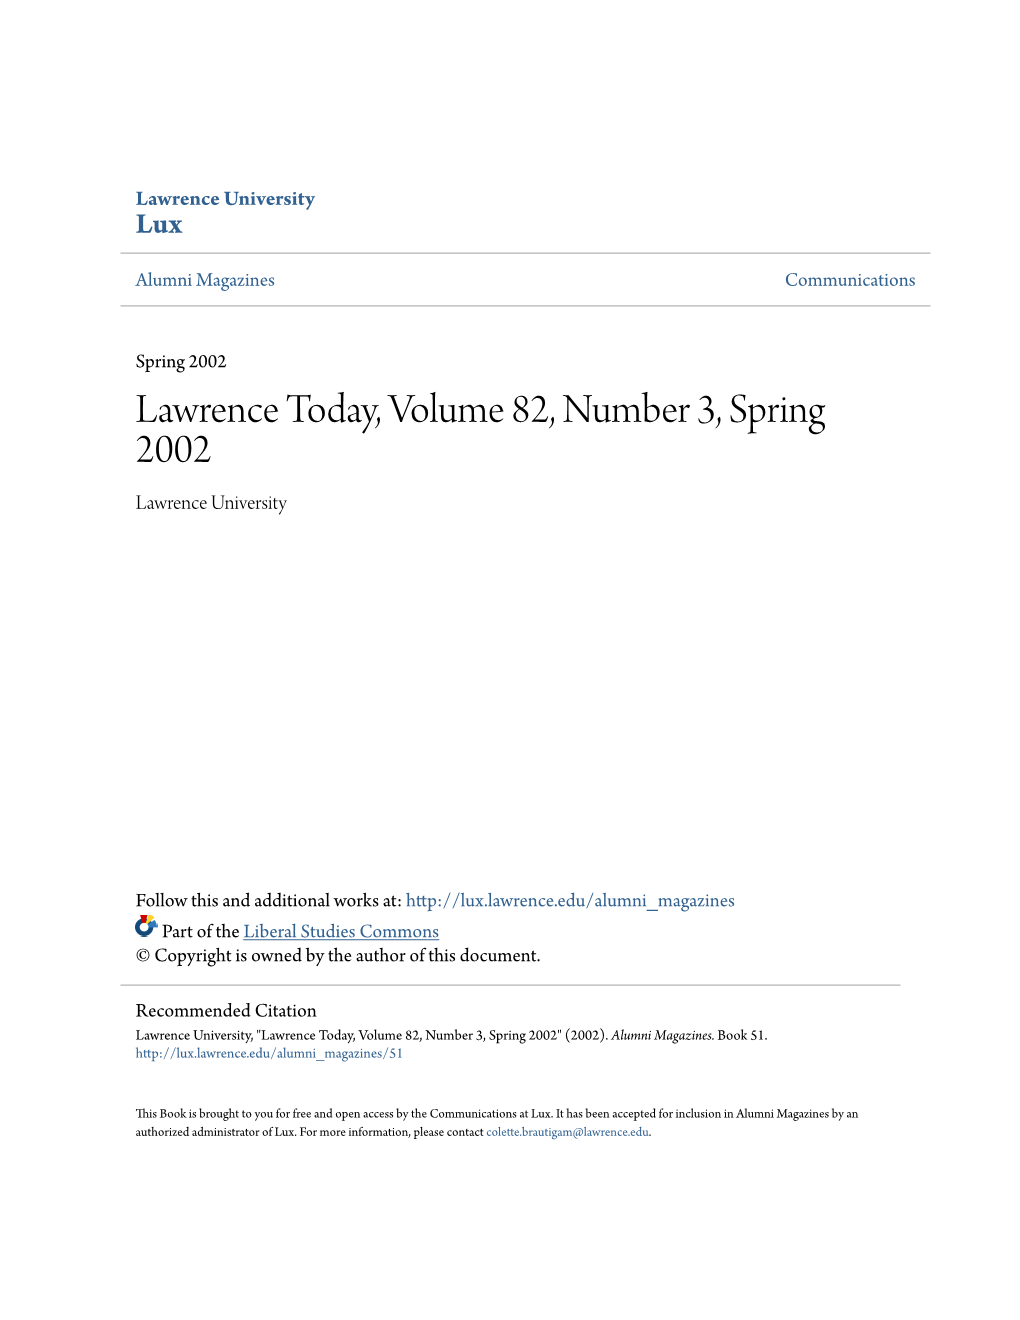 Lawrence Today, Volume 82, Number 3, Spring 2002 Lawrence University